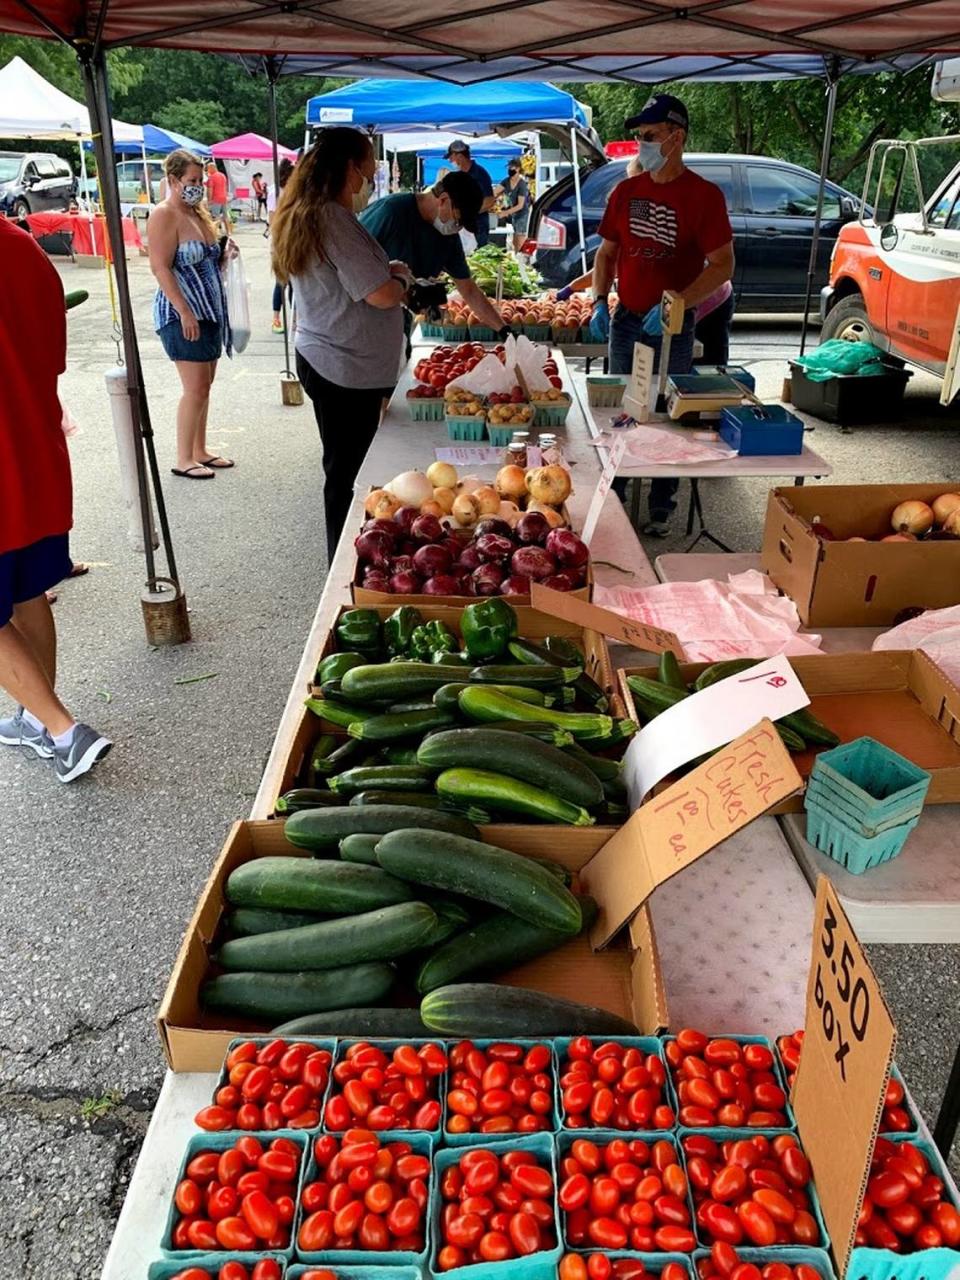 Many farmers markets vendors experienced a good year in 2020, and are hoping for the same this year.